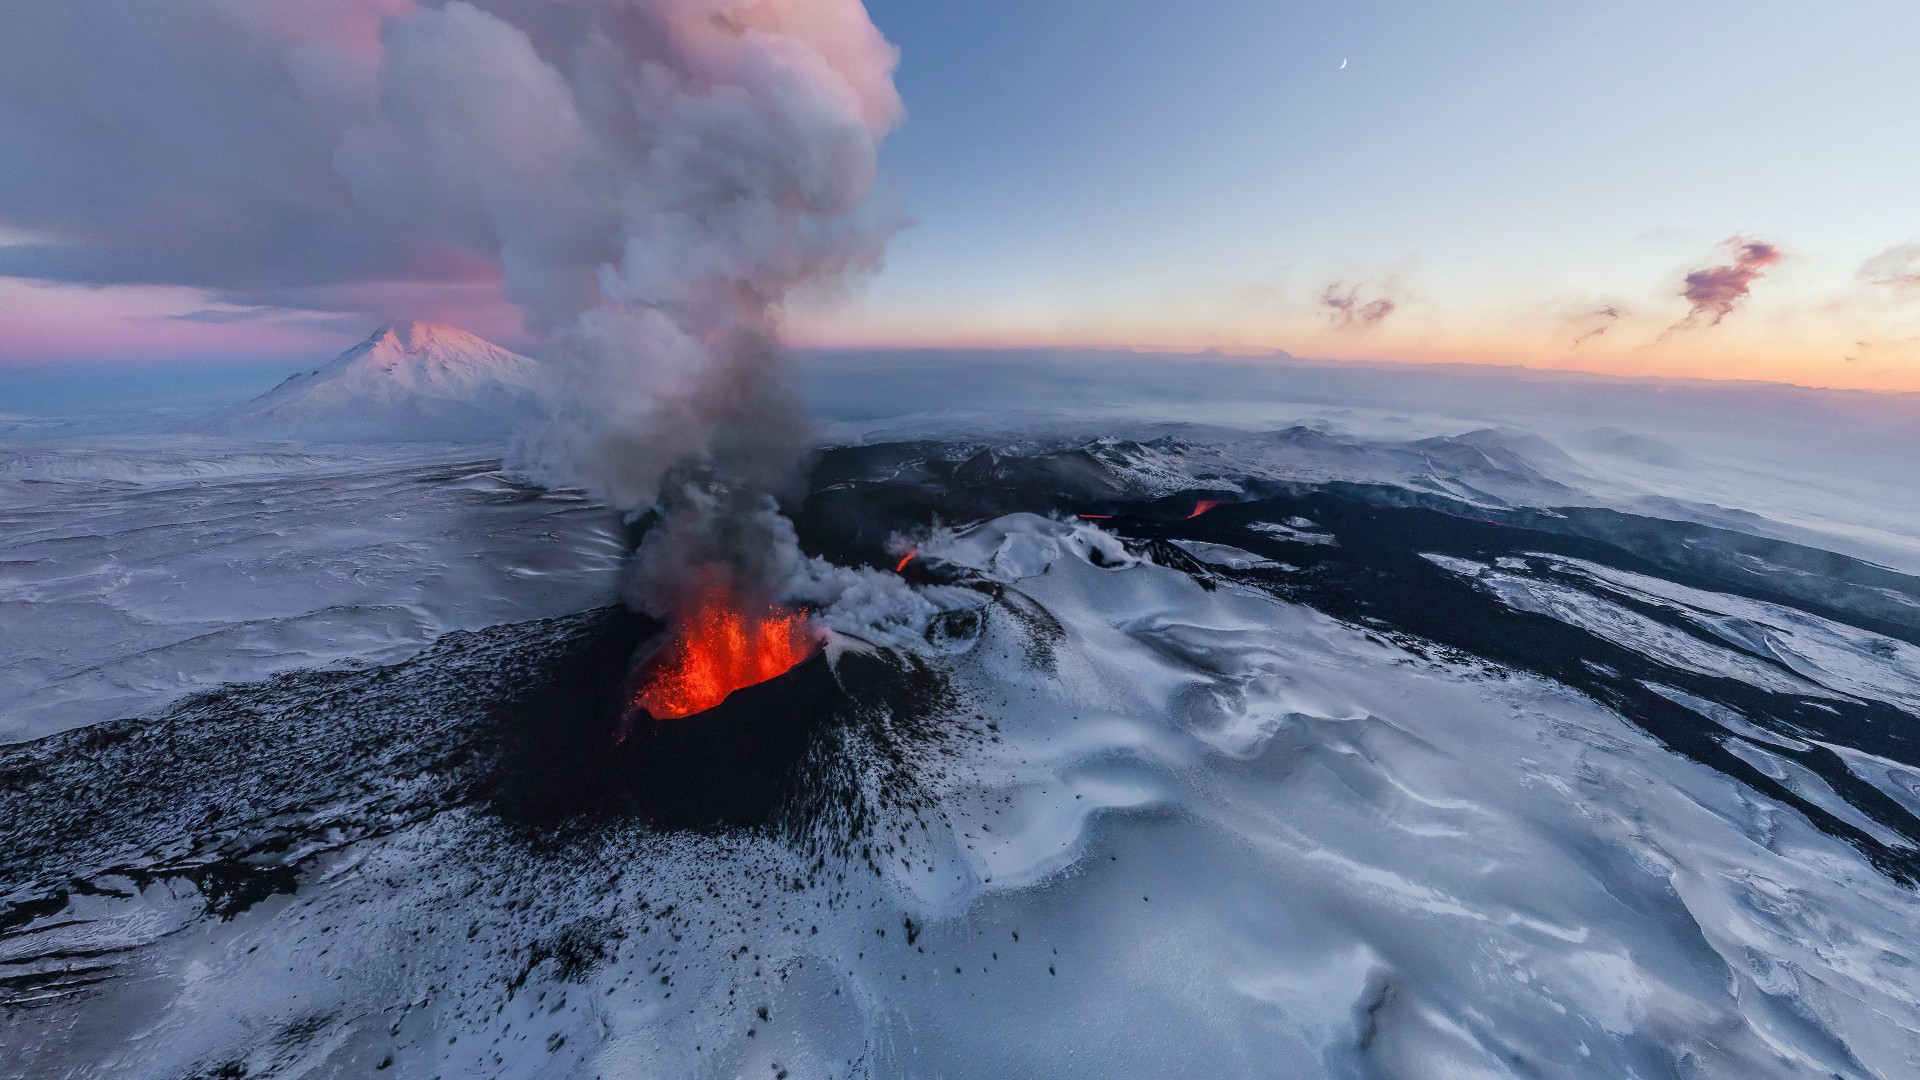 Nature___Volcanoes_Red_lava_among_the_snow-capped_peaks_099808_.jpg